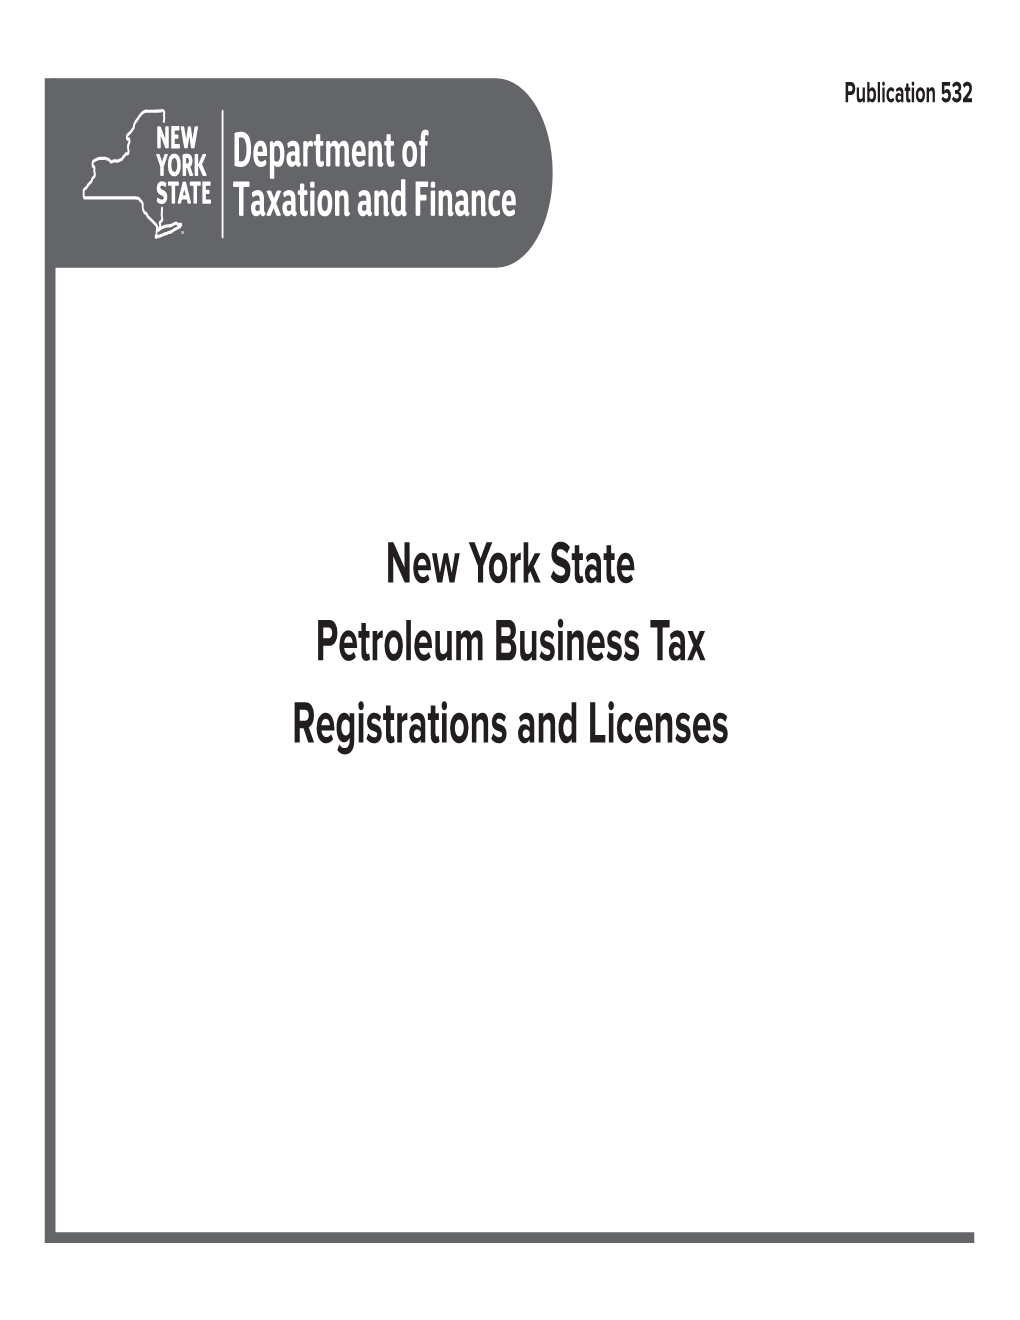 Publication 532:6/19:New York State Petroleum Business Tax